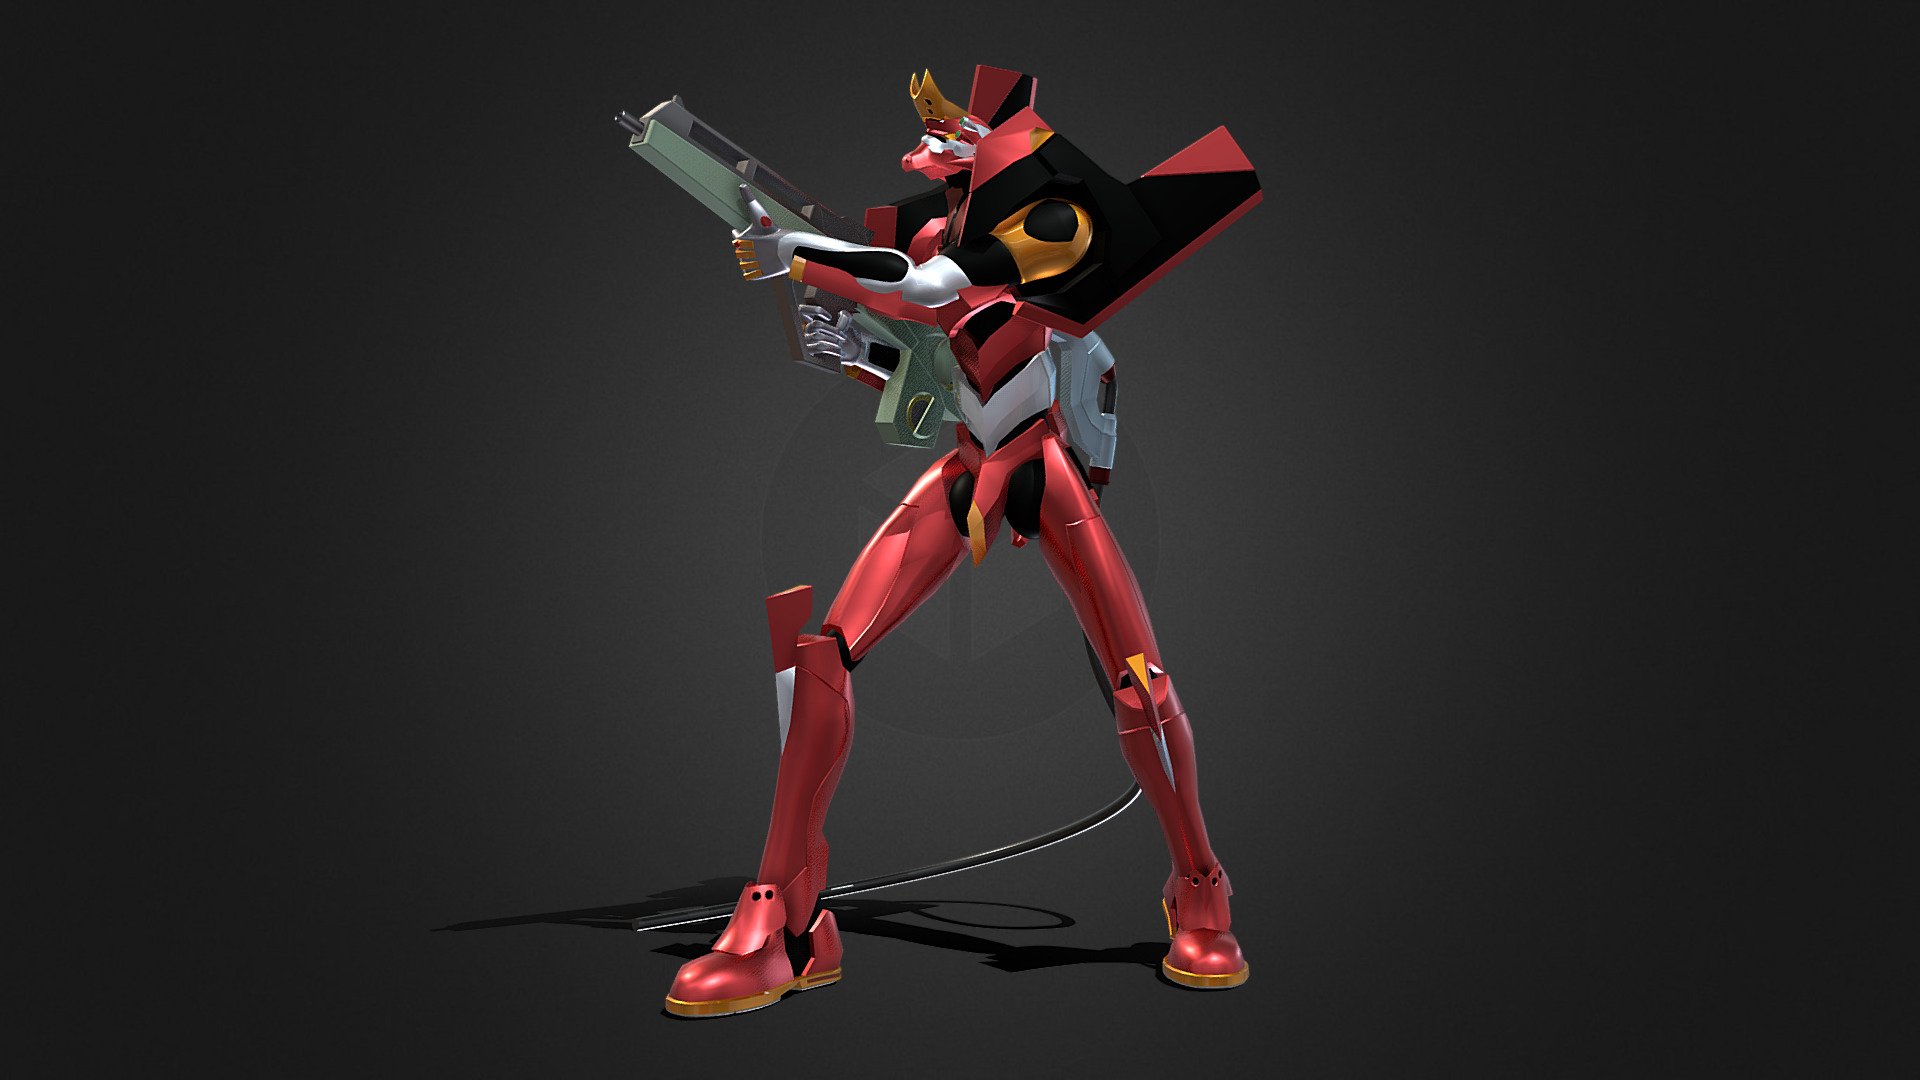 If you’re interested in purchasing any of my models, contact me @ andrewdisaacs@yahoo.com

Evangelion Unit 02 as seen from the anime Neon Genesis Evangelion.

Made in 3DS Max by myself 3d model